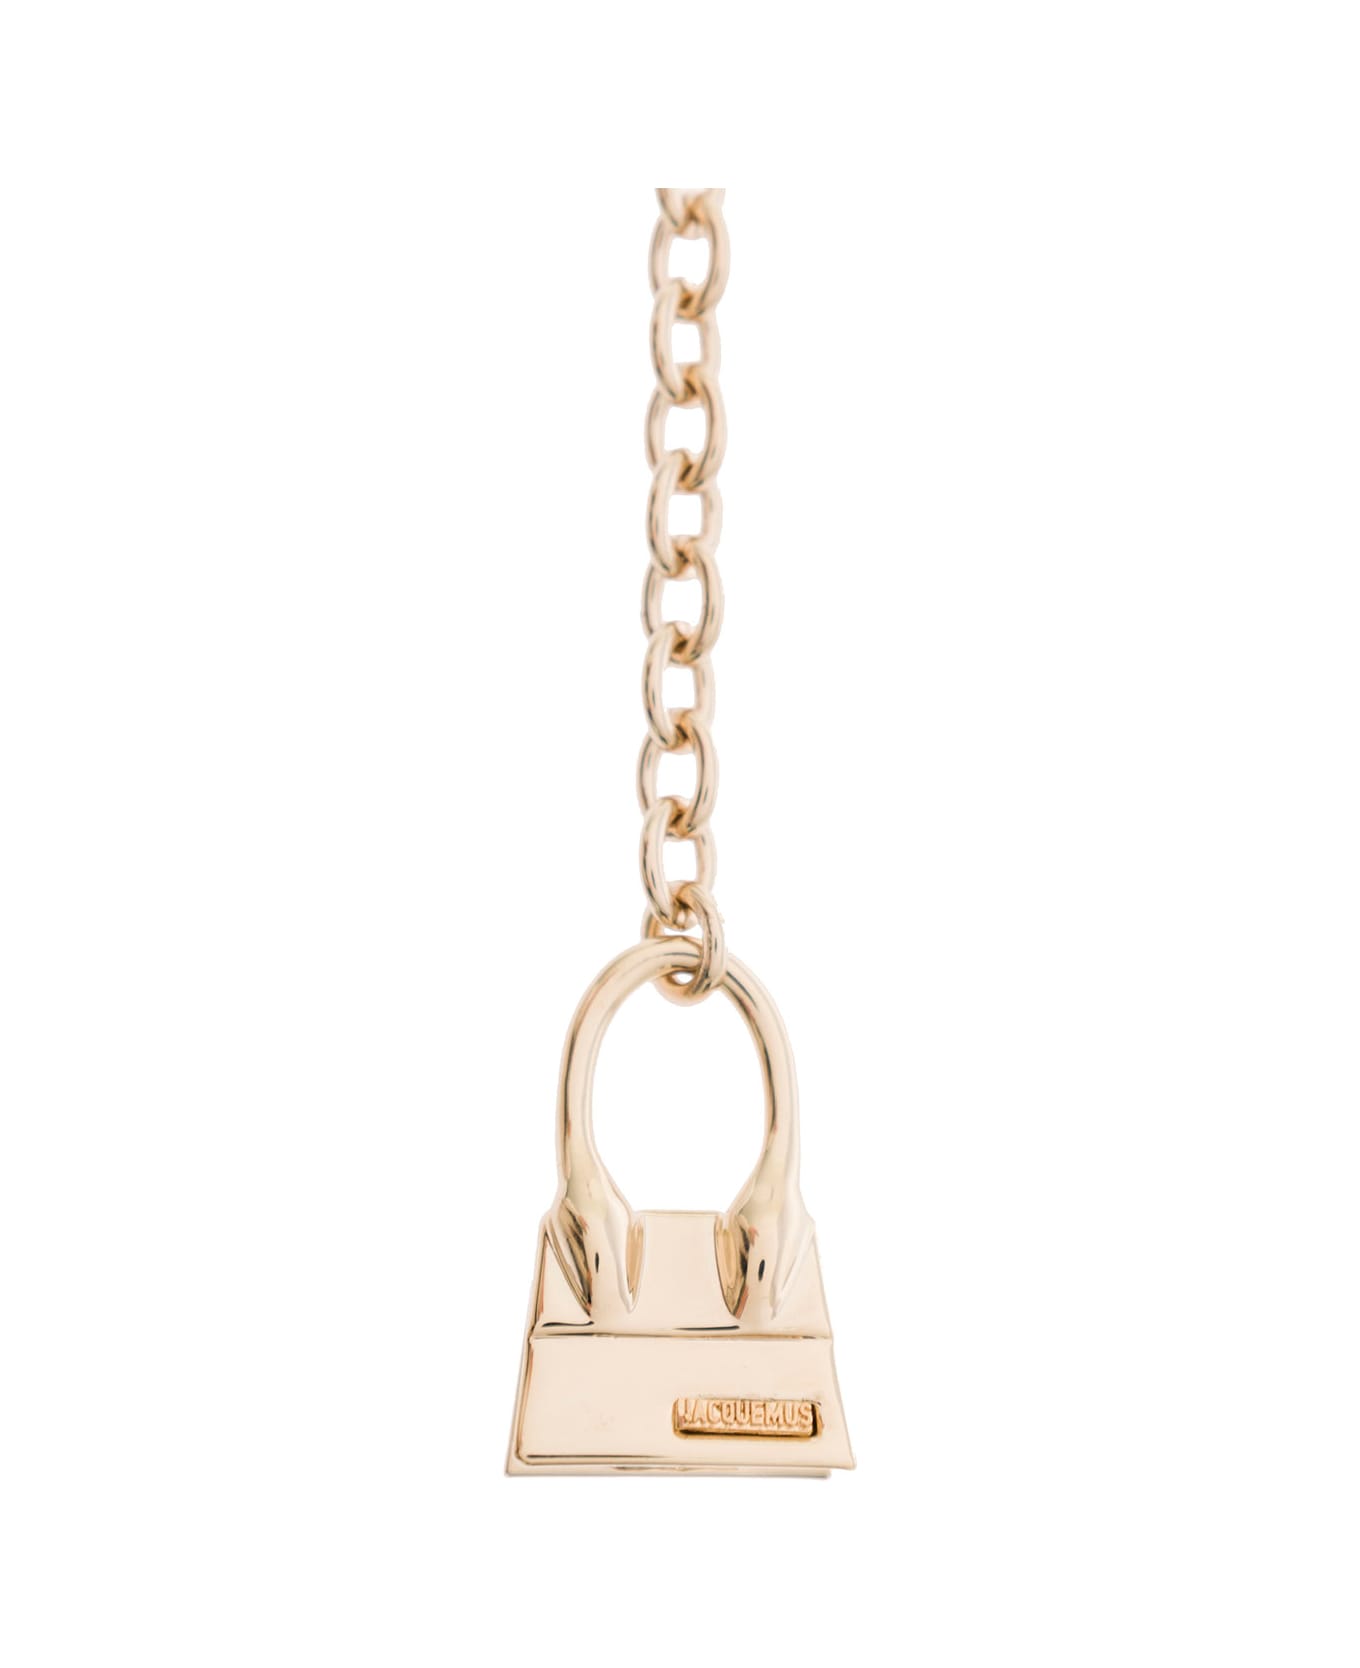 Jacquemus Chain Bracelet With Chiquito Charm - LIGHT GOLD ブレスレット